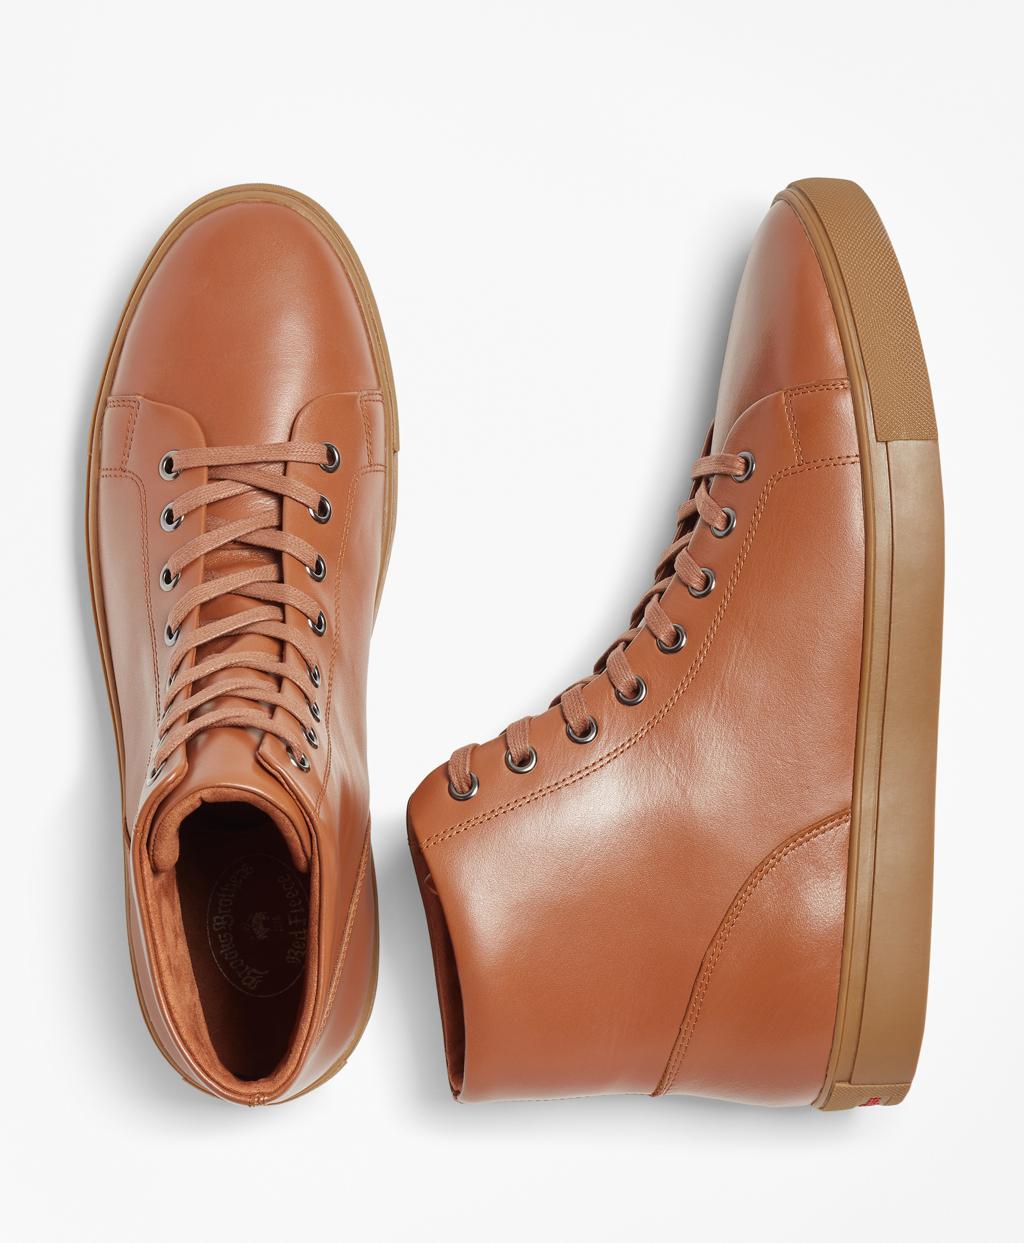 Brooks Brothers Leather High-top Sneakers in Cognac (Brown) for Men - Lyst